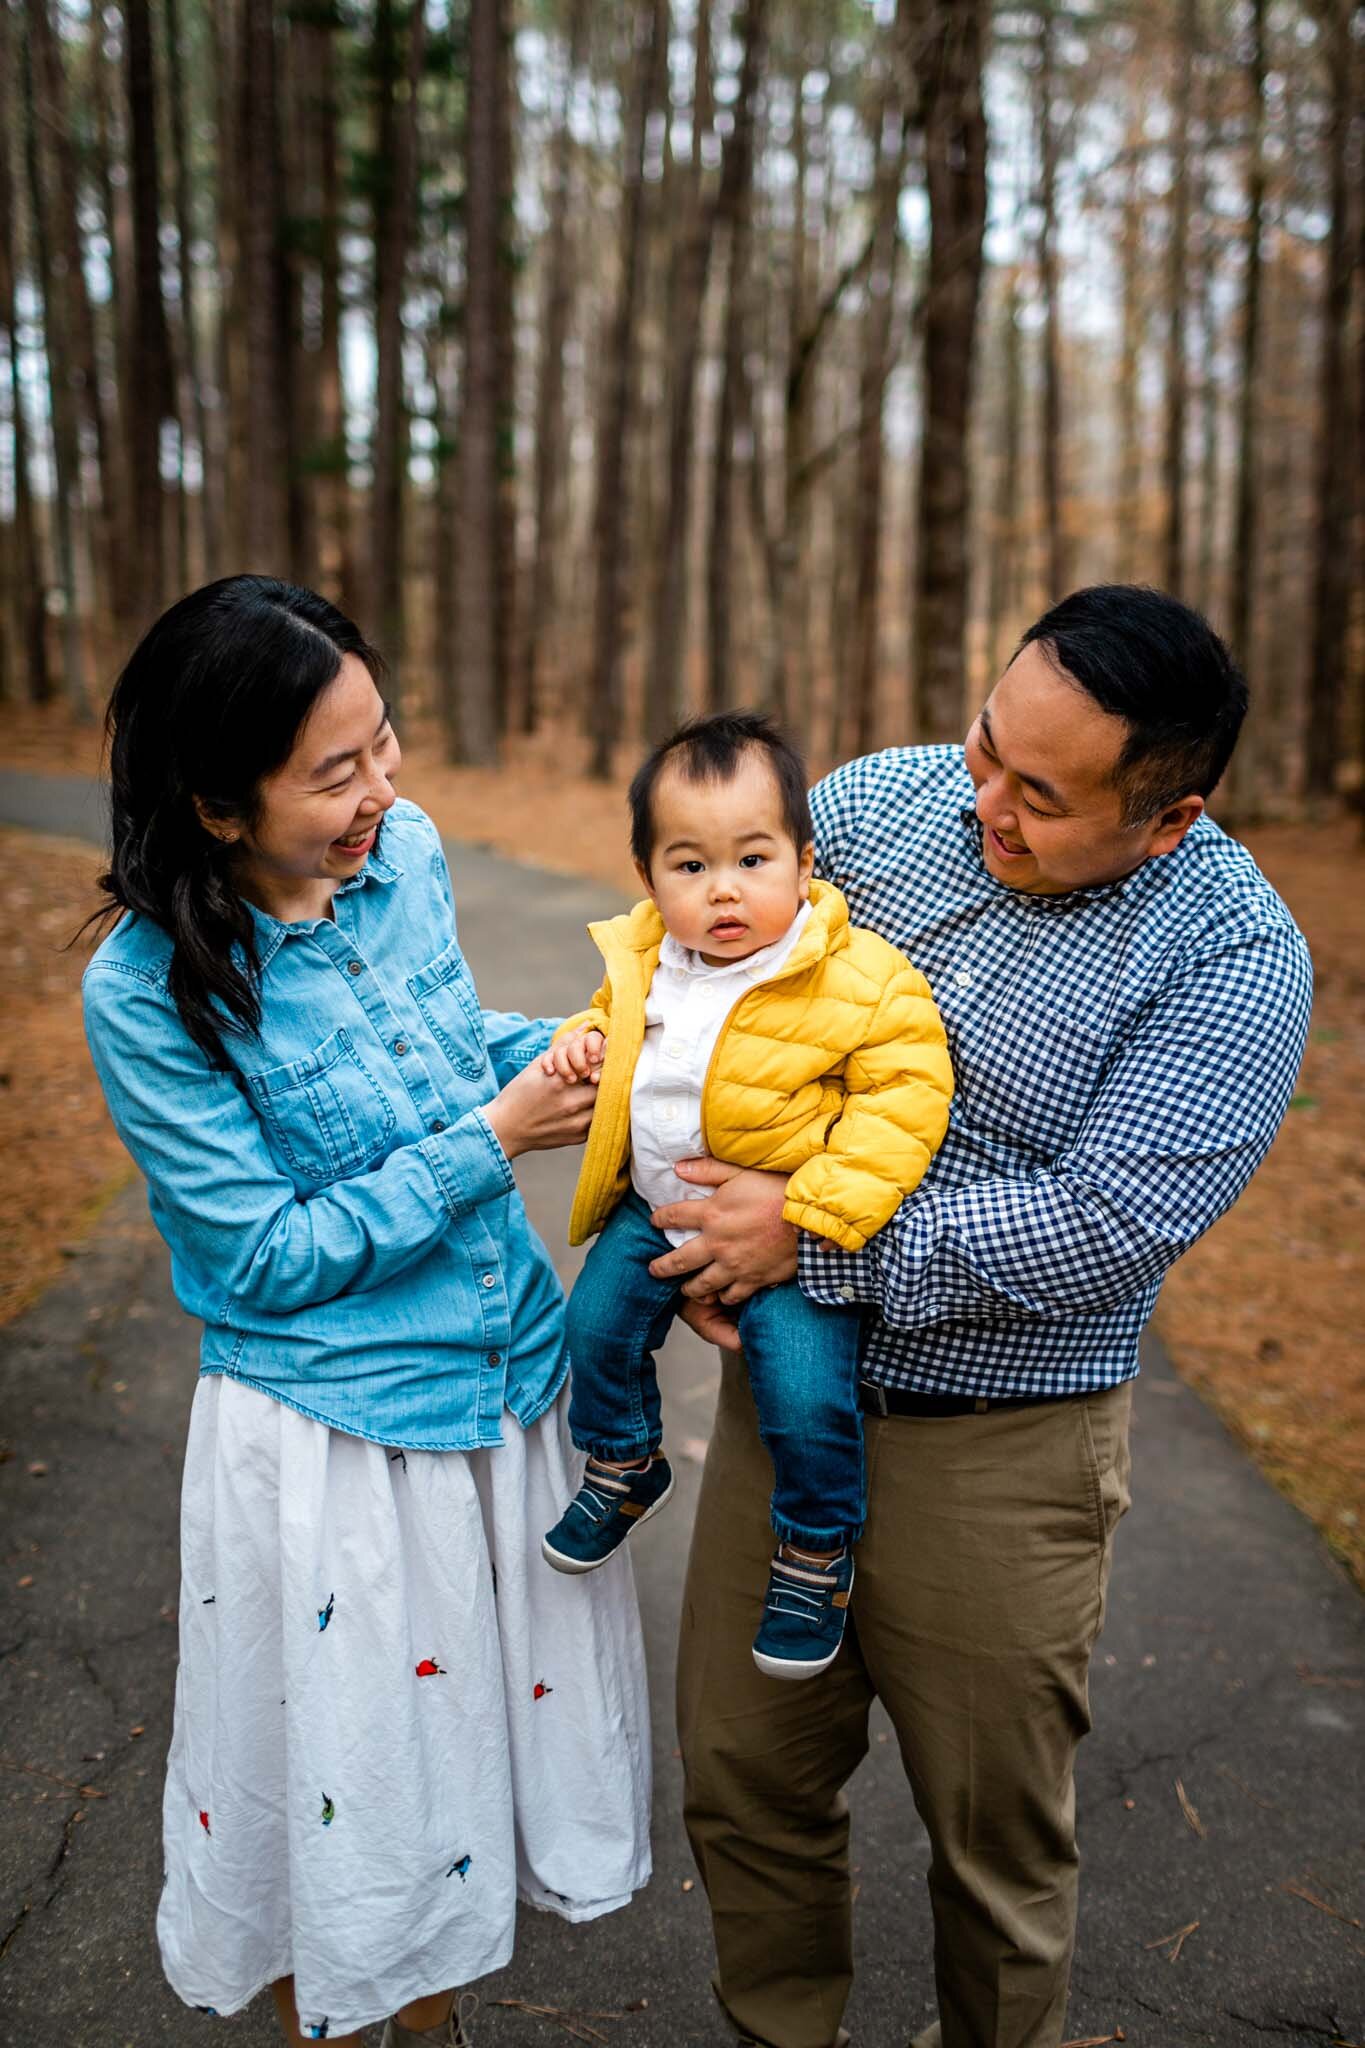 Raleigh Family Photographer | By G. Lin Photography | Umstead Park | Parents holding baby